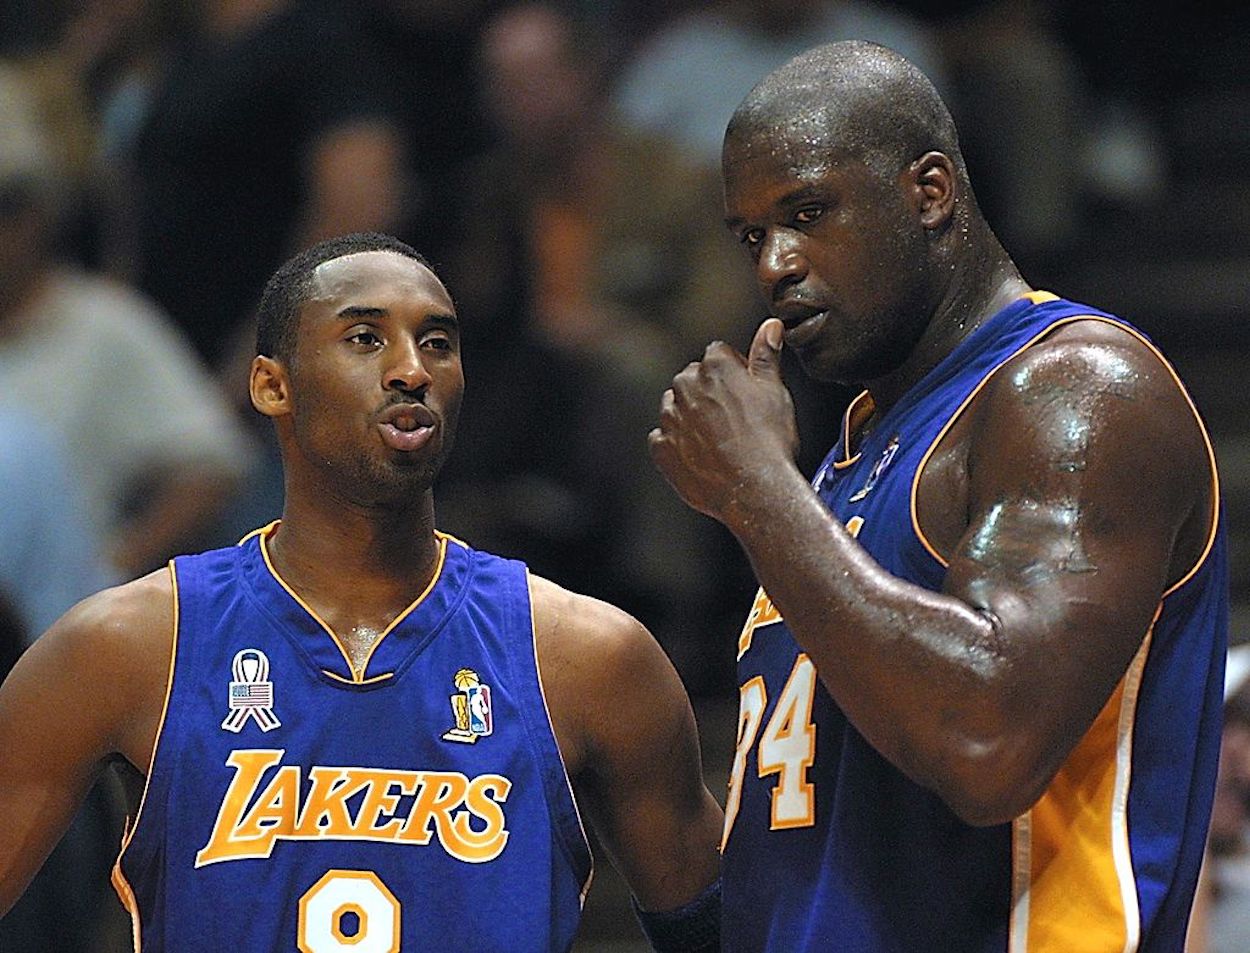 Kobe Bryant (L) and Shaquille O'Neal (R) talk during their time as Lakers teammates.